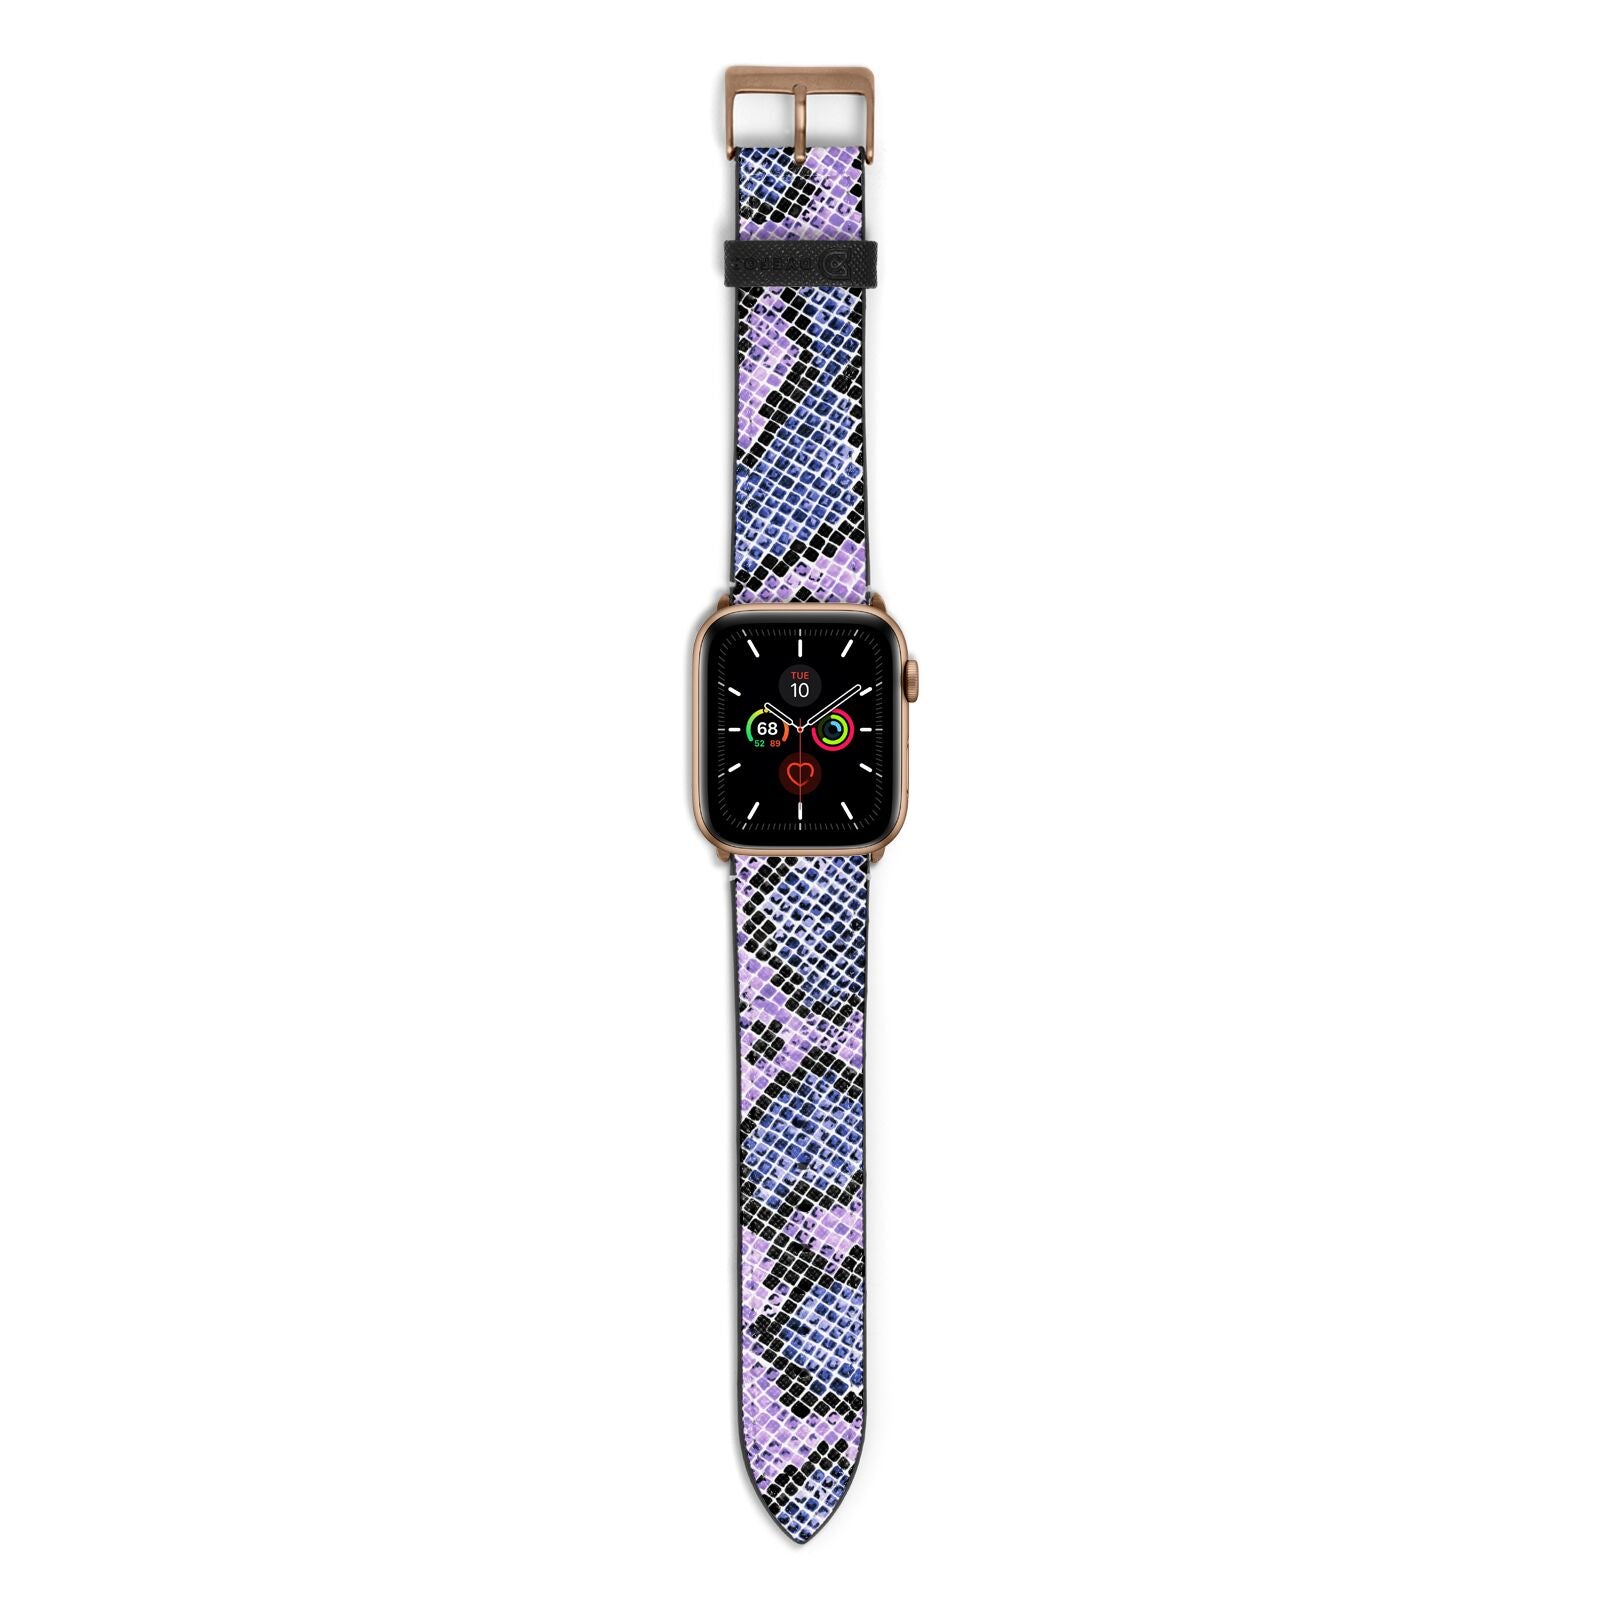 Purple And Blue Snakeskin Apple Watch Strap with Gold Hardware